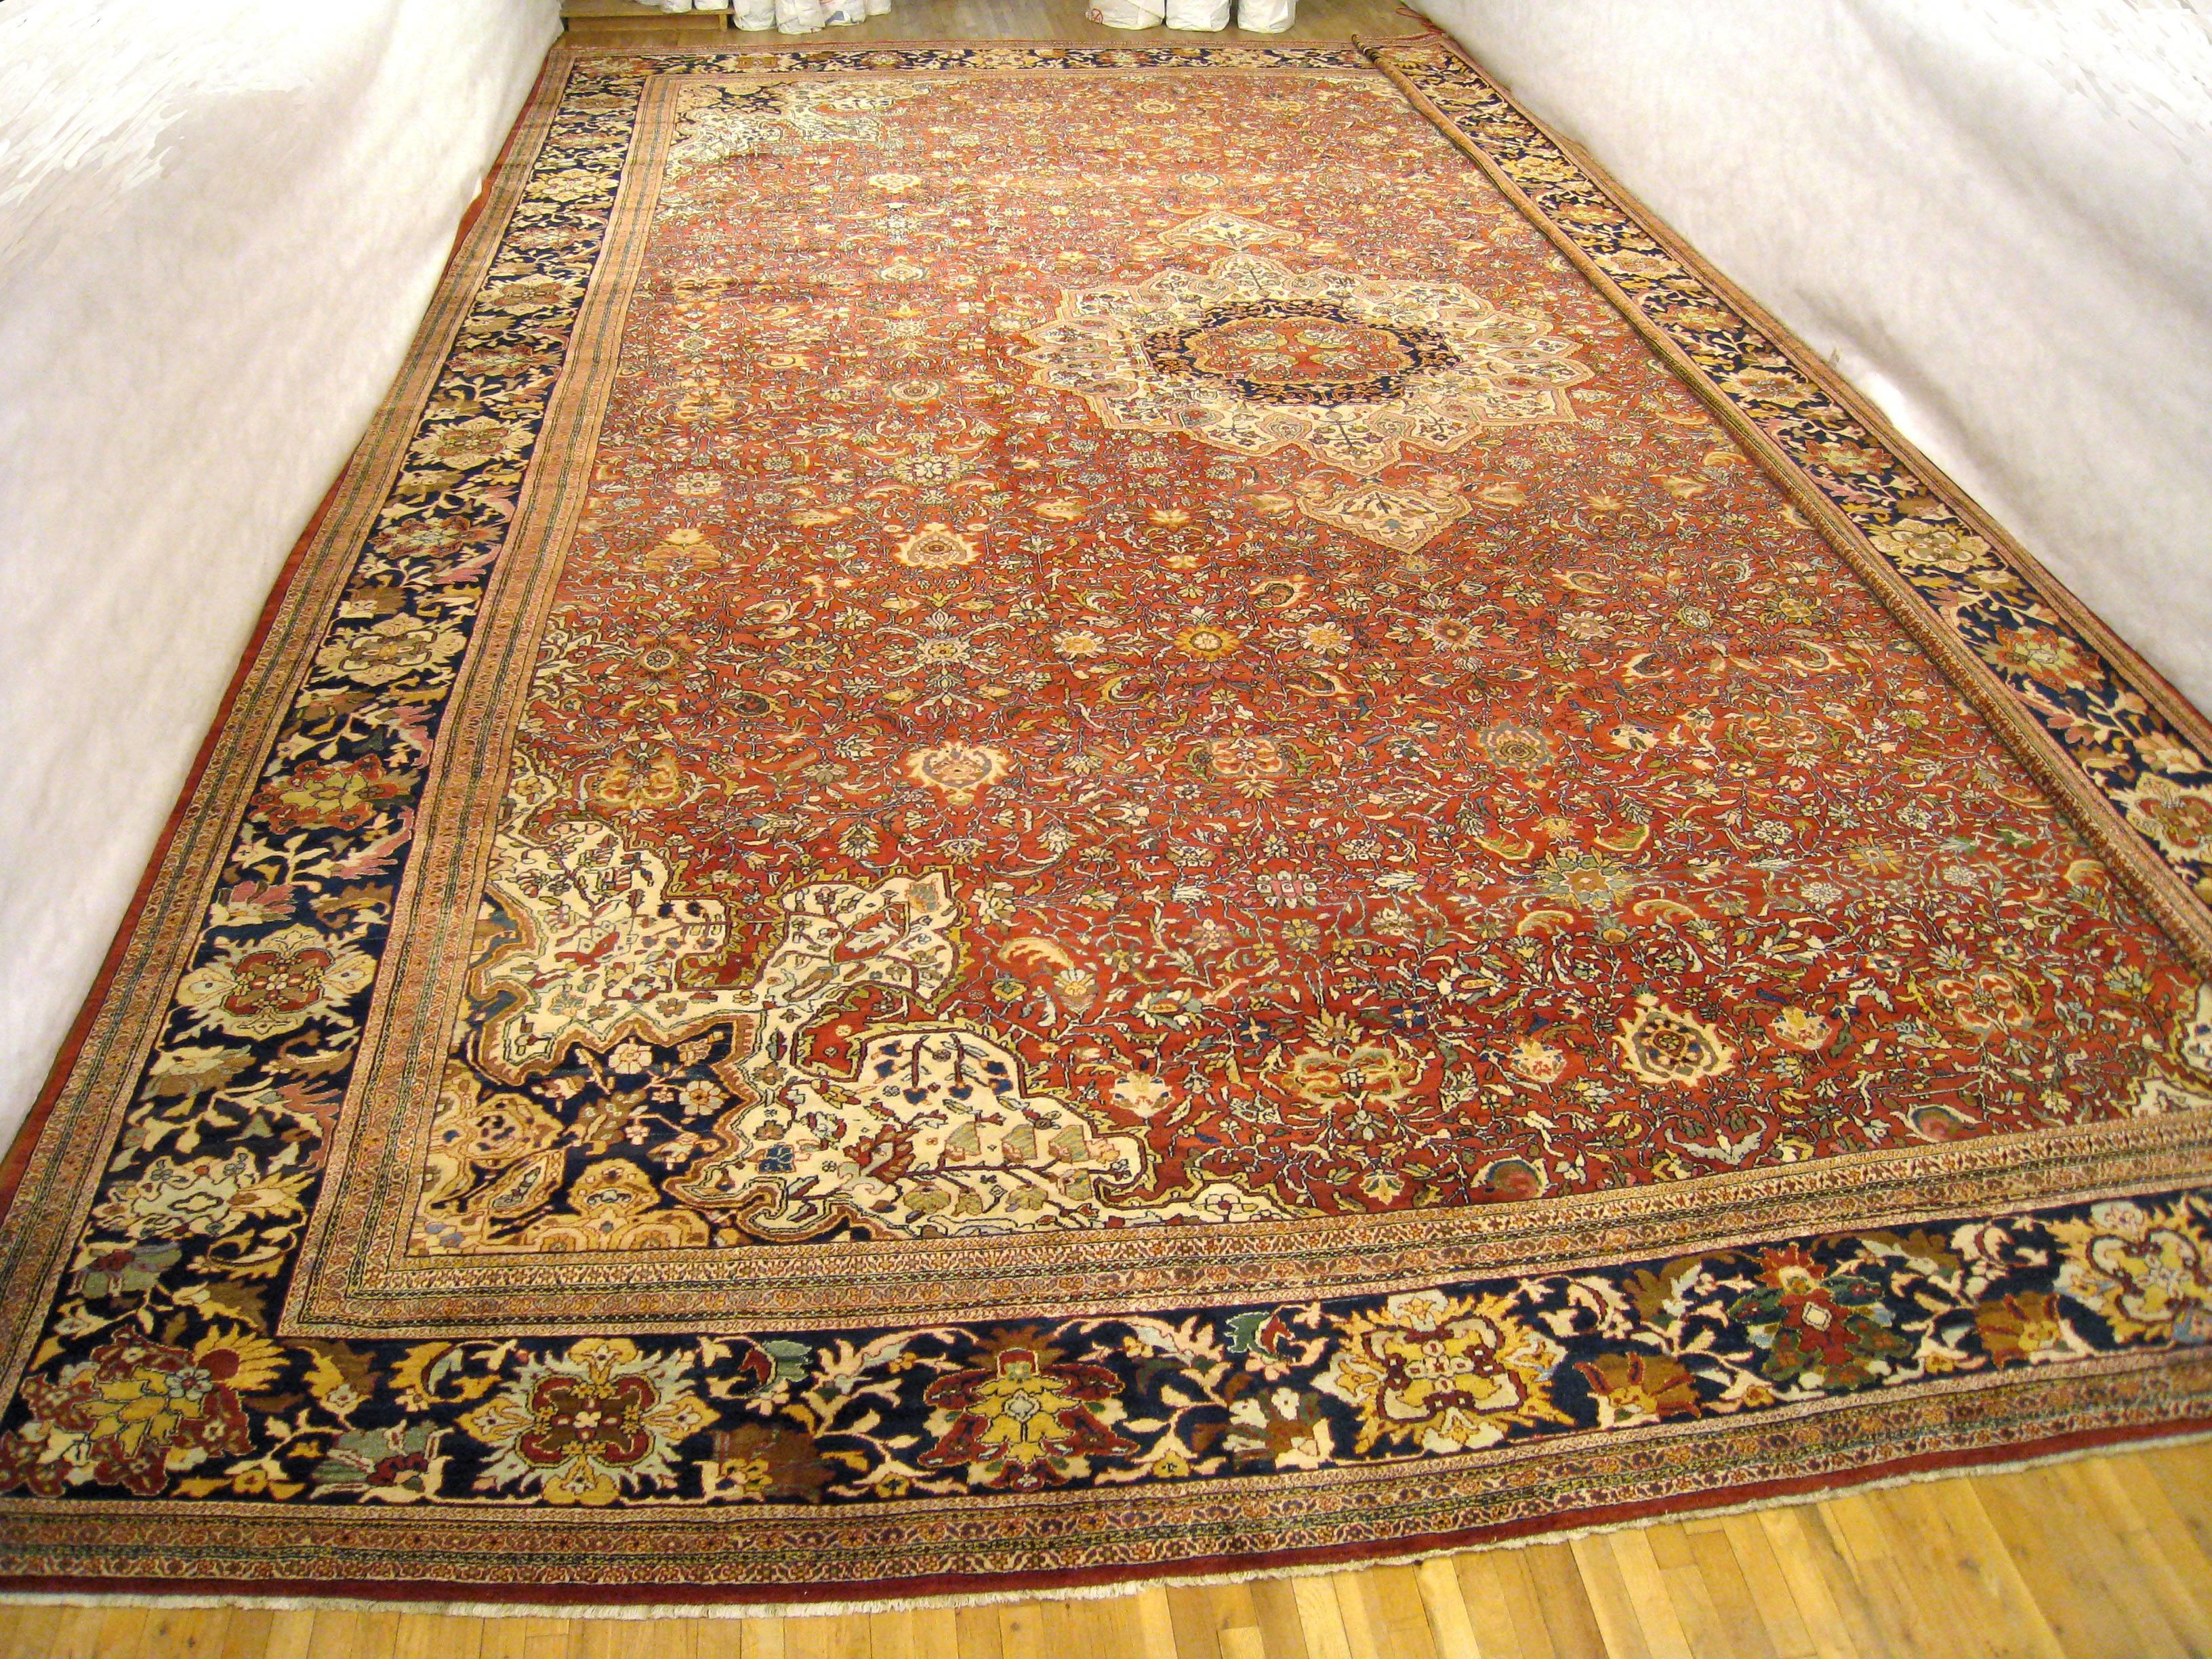 An antique Persian Ziegler Sultanabad oriental carpet, circa 1890, size: 27'4 H x 19'1 W. This Classic hand knotted wool carpet features an ivory central medallion on a coral red primary field, with reciprocal corner spandrels. Enclosed within a